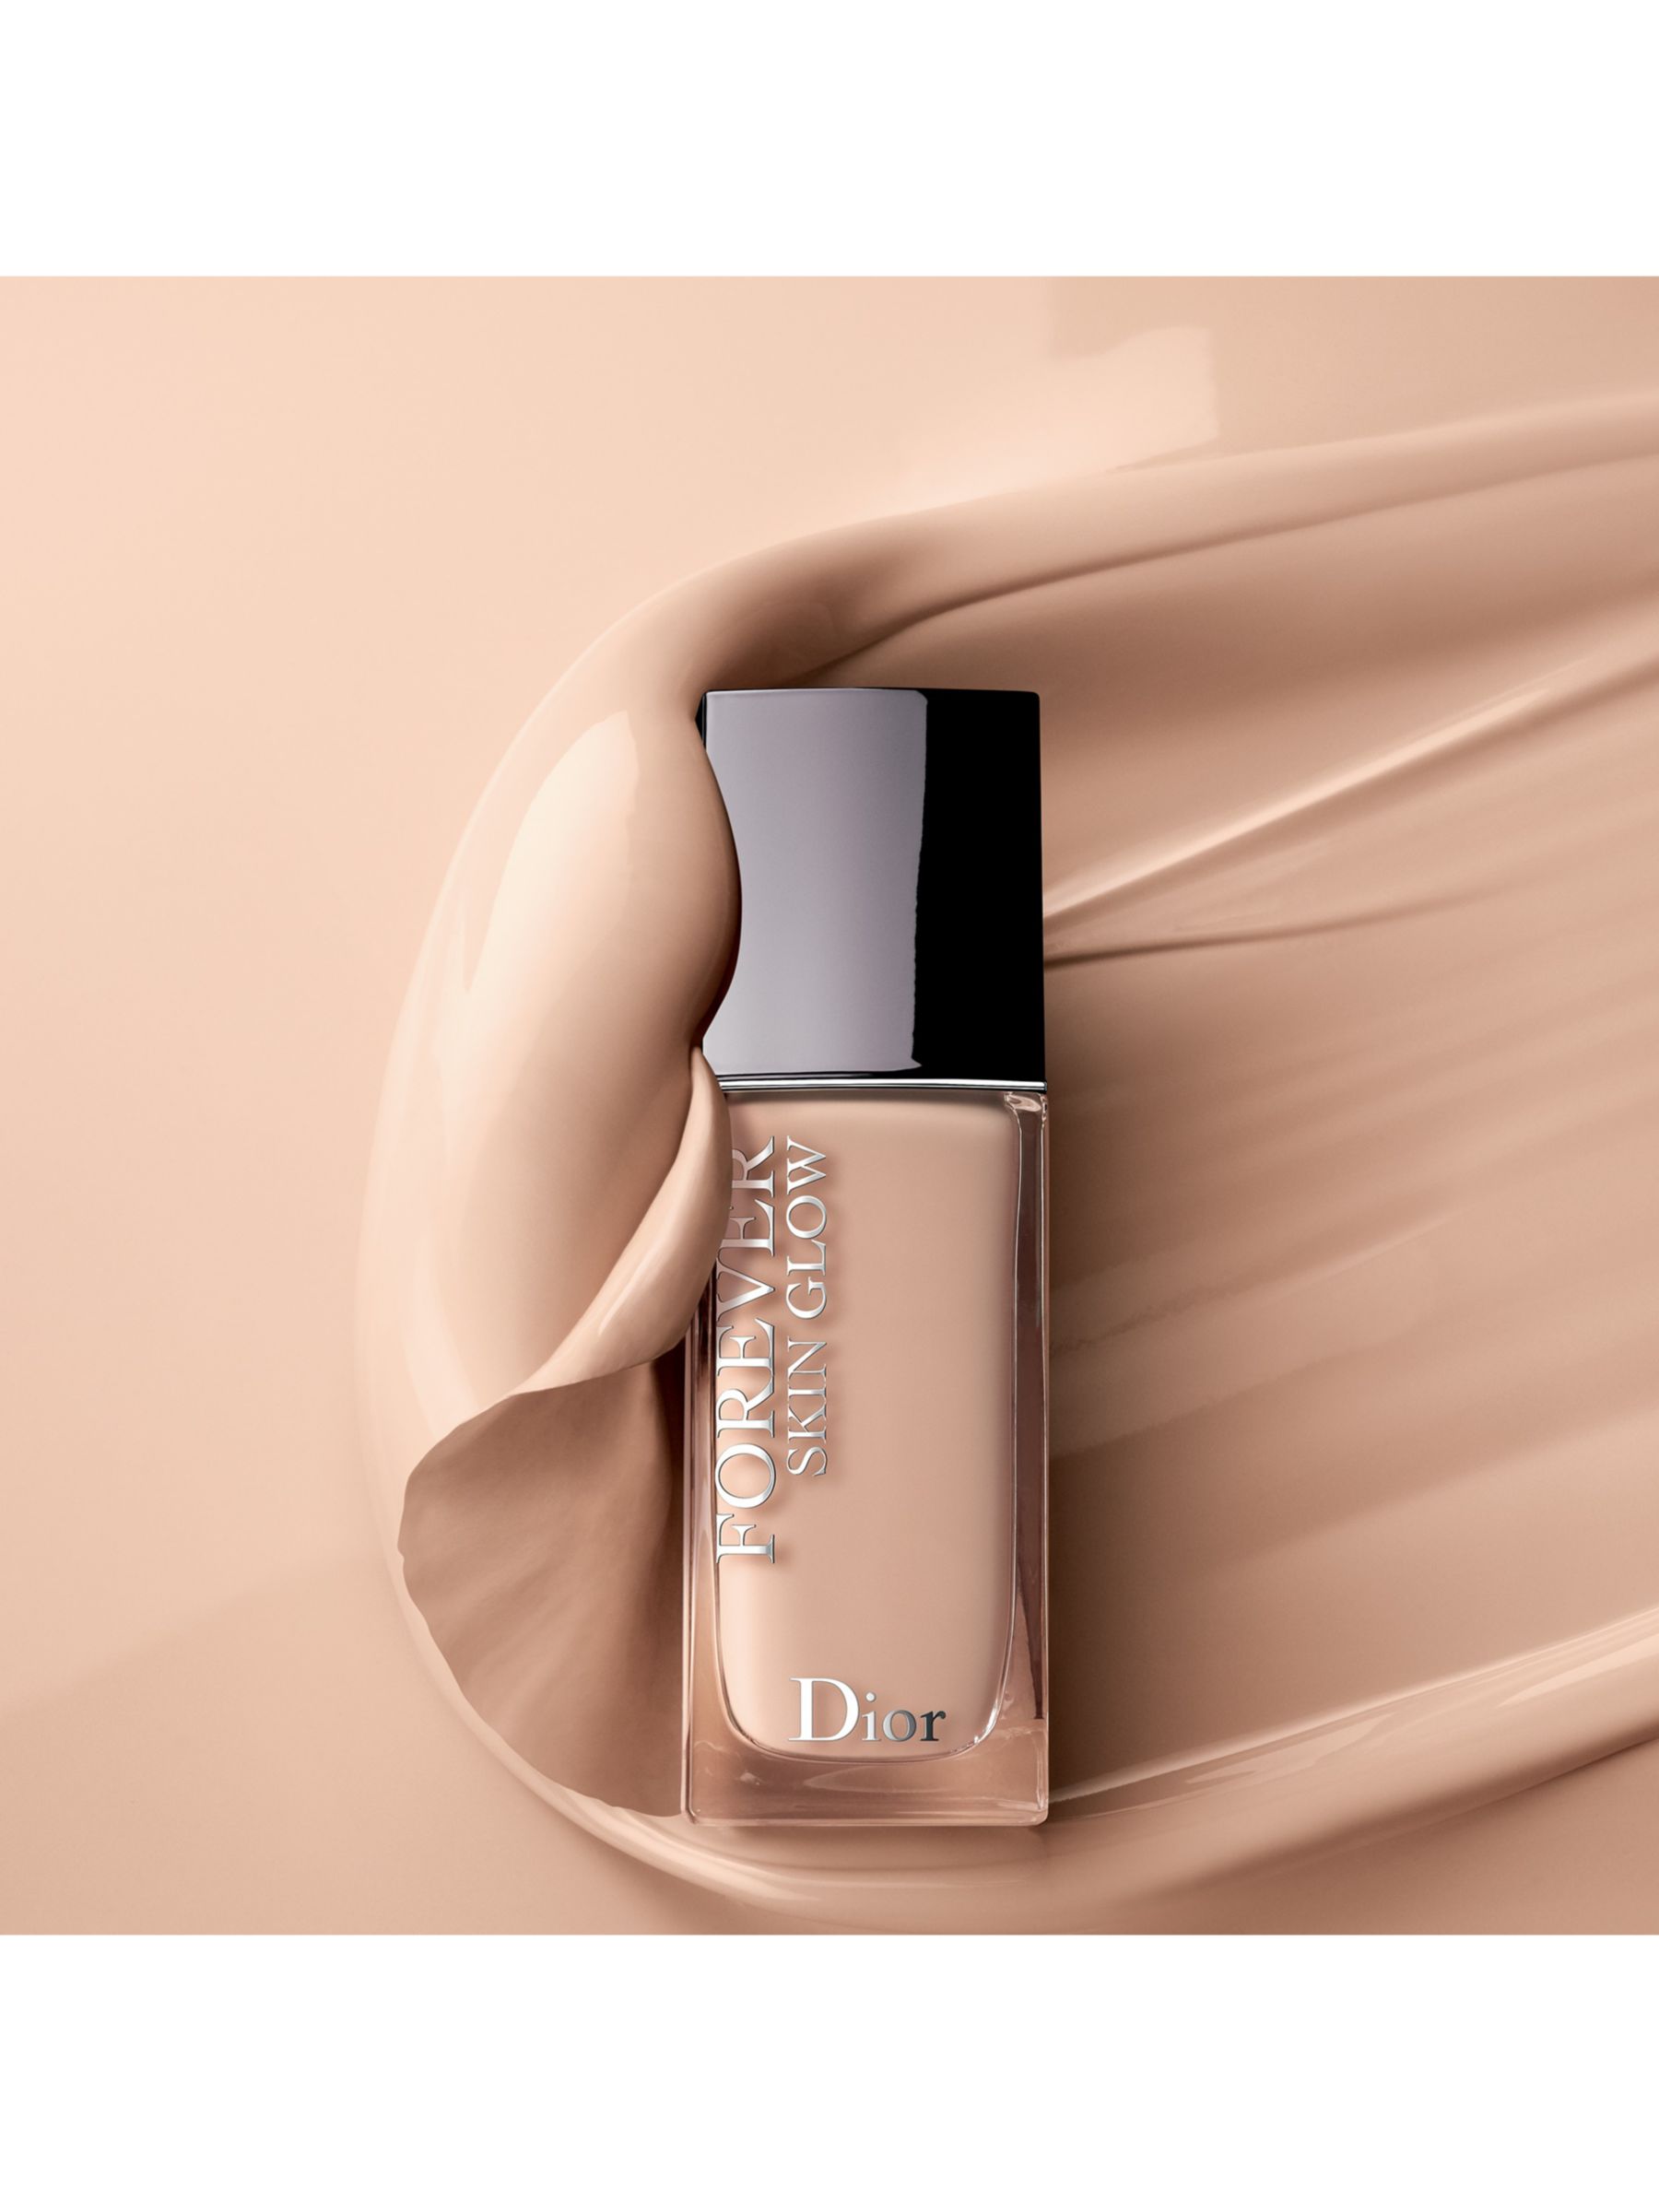 Dior Forever Skin Glow Foundation at 